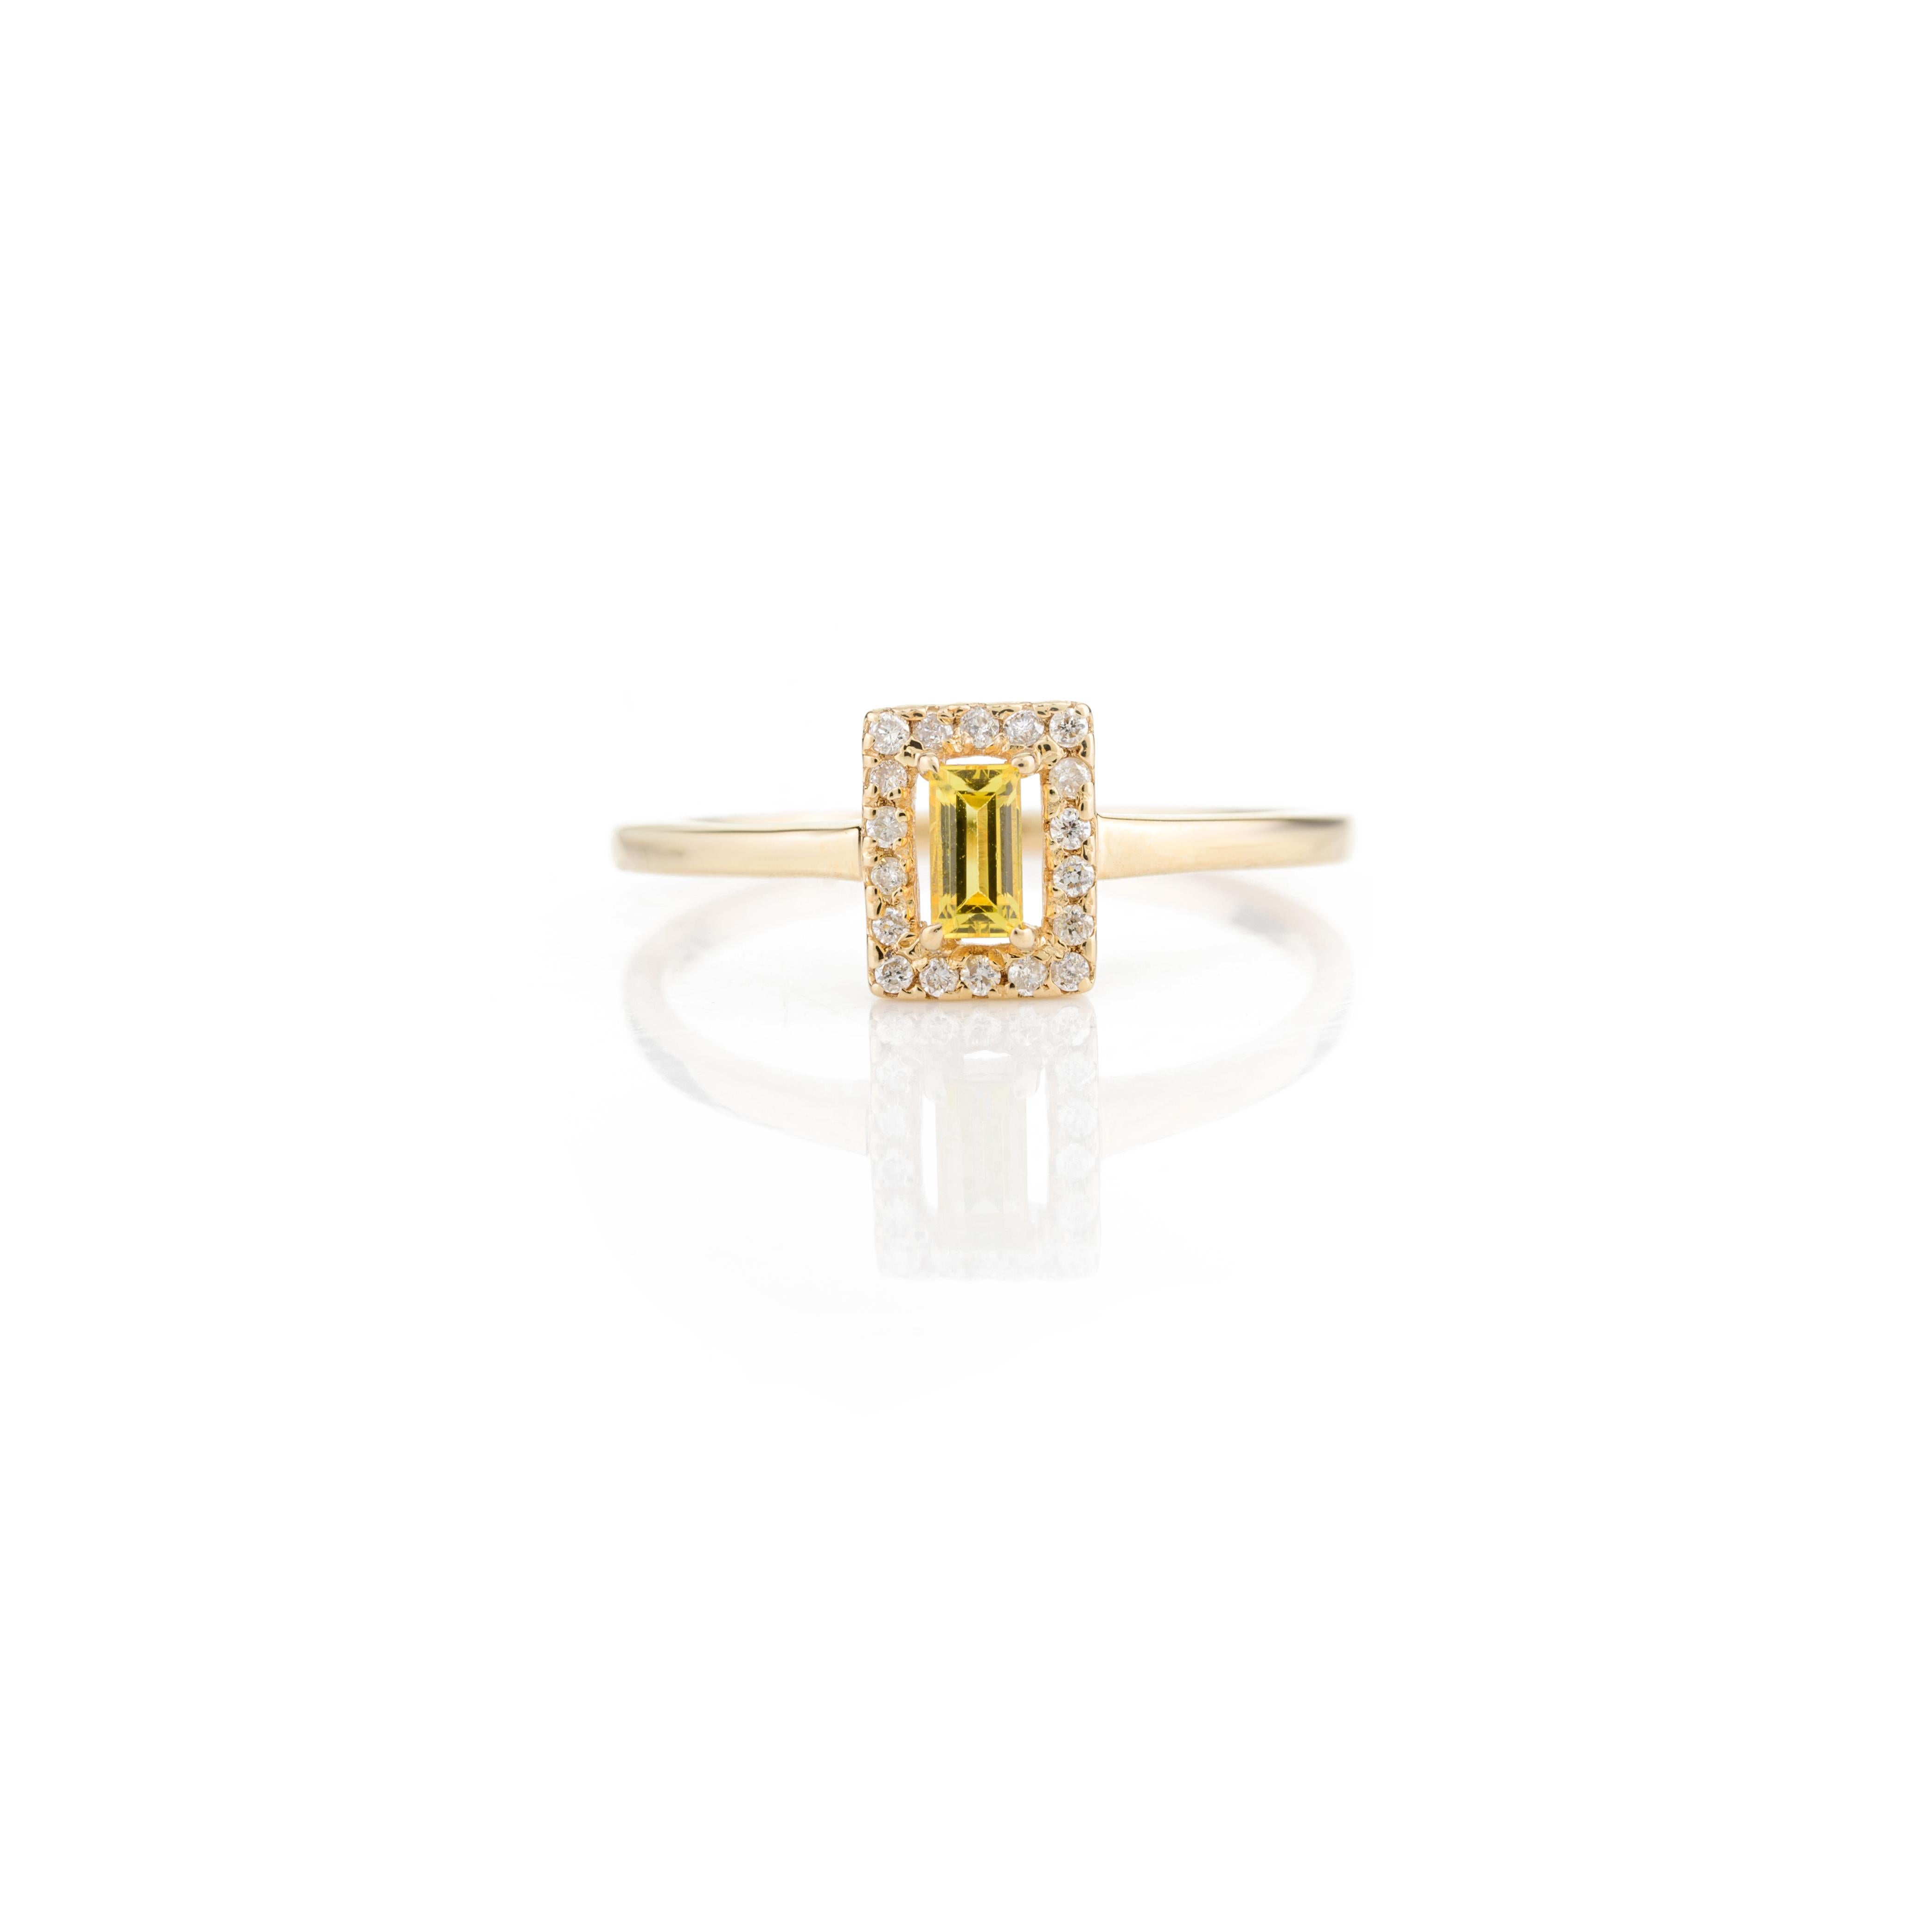 For Sale:  14k Solid Yellow Gold Dainty Baguette Yellow Sapphire and Halo Diamond Ring 9